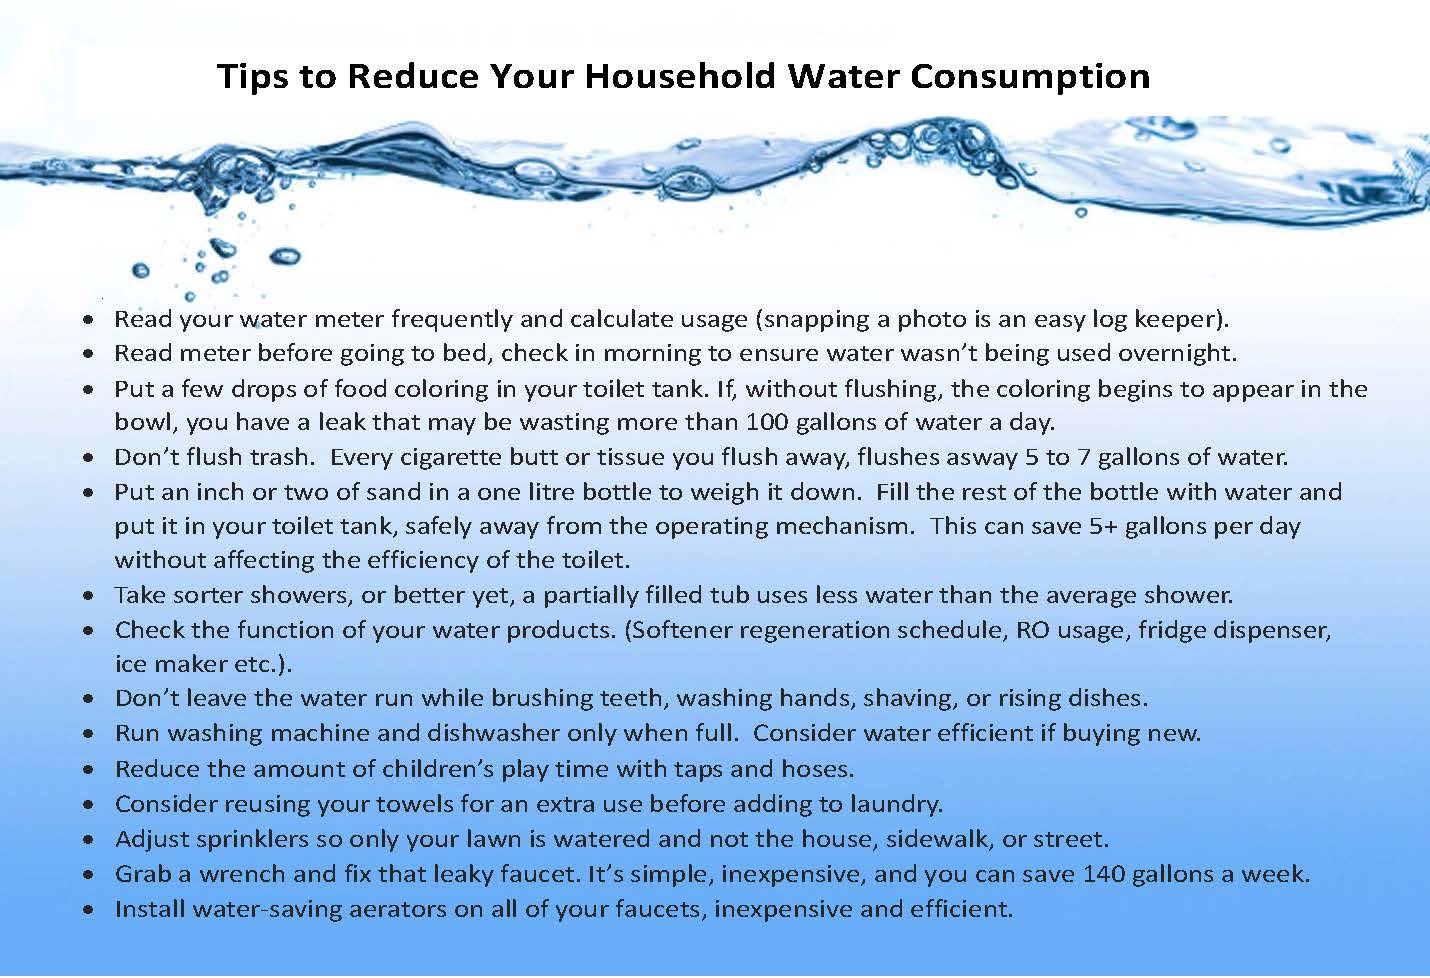 Water Conservation Tips 2021